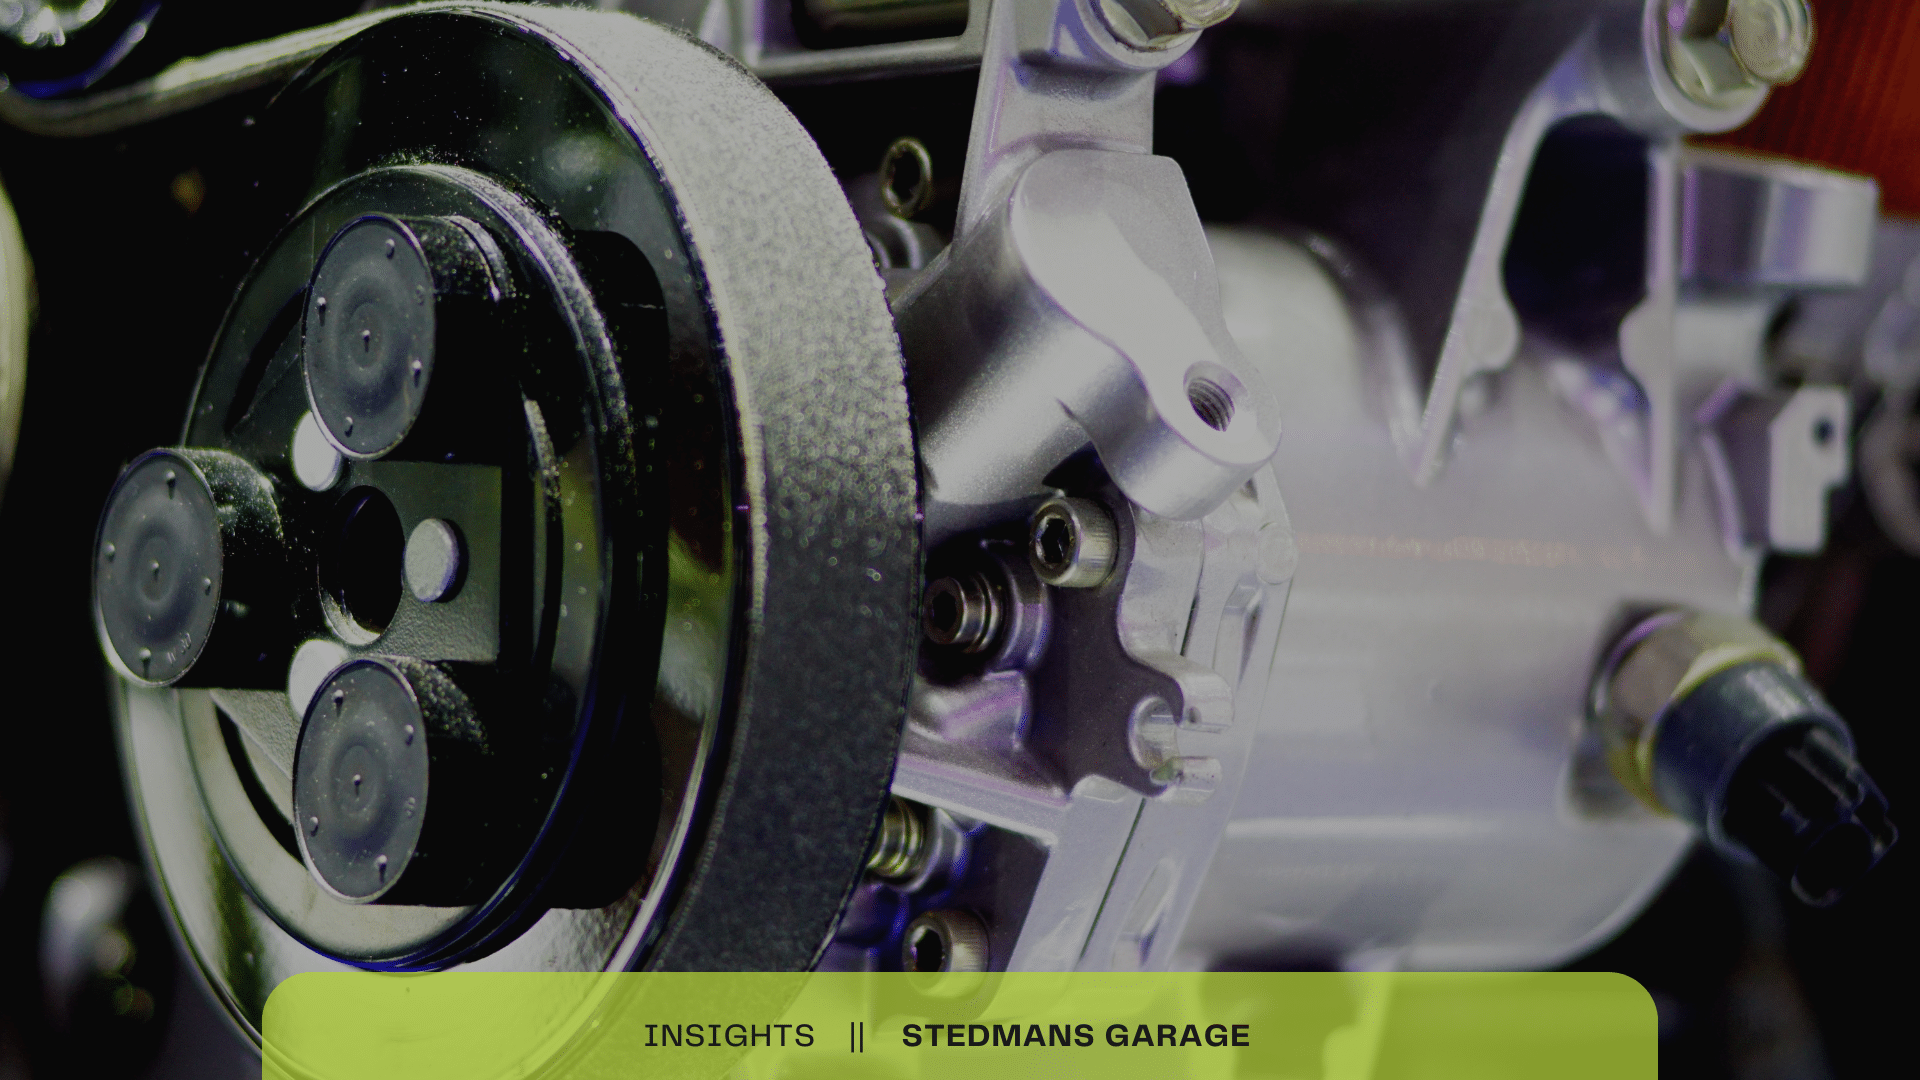 Address Mini power steering pump issues effectively with Stedmans Garage. Learn about common faults, maintenance tips, and expert repair services.